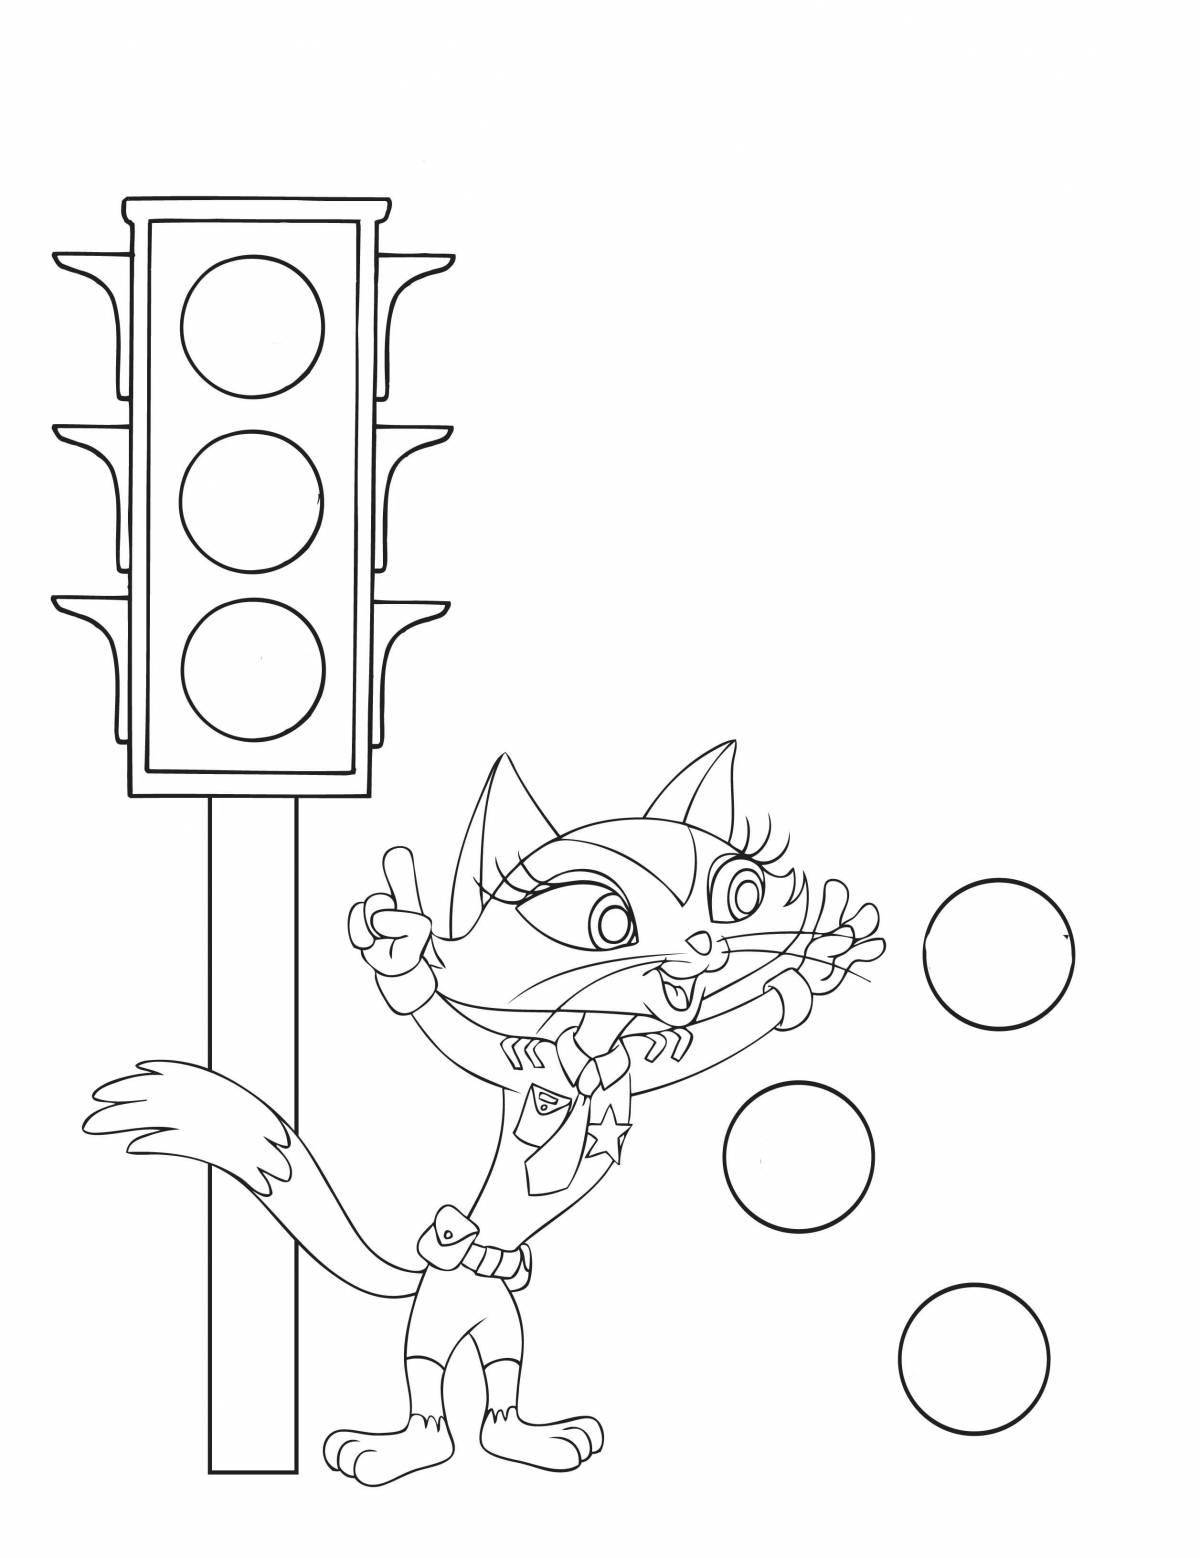 Colorful traffic light coloring page for kids